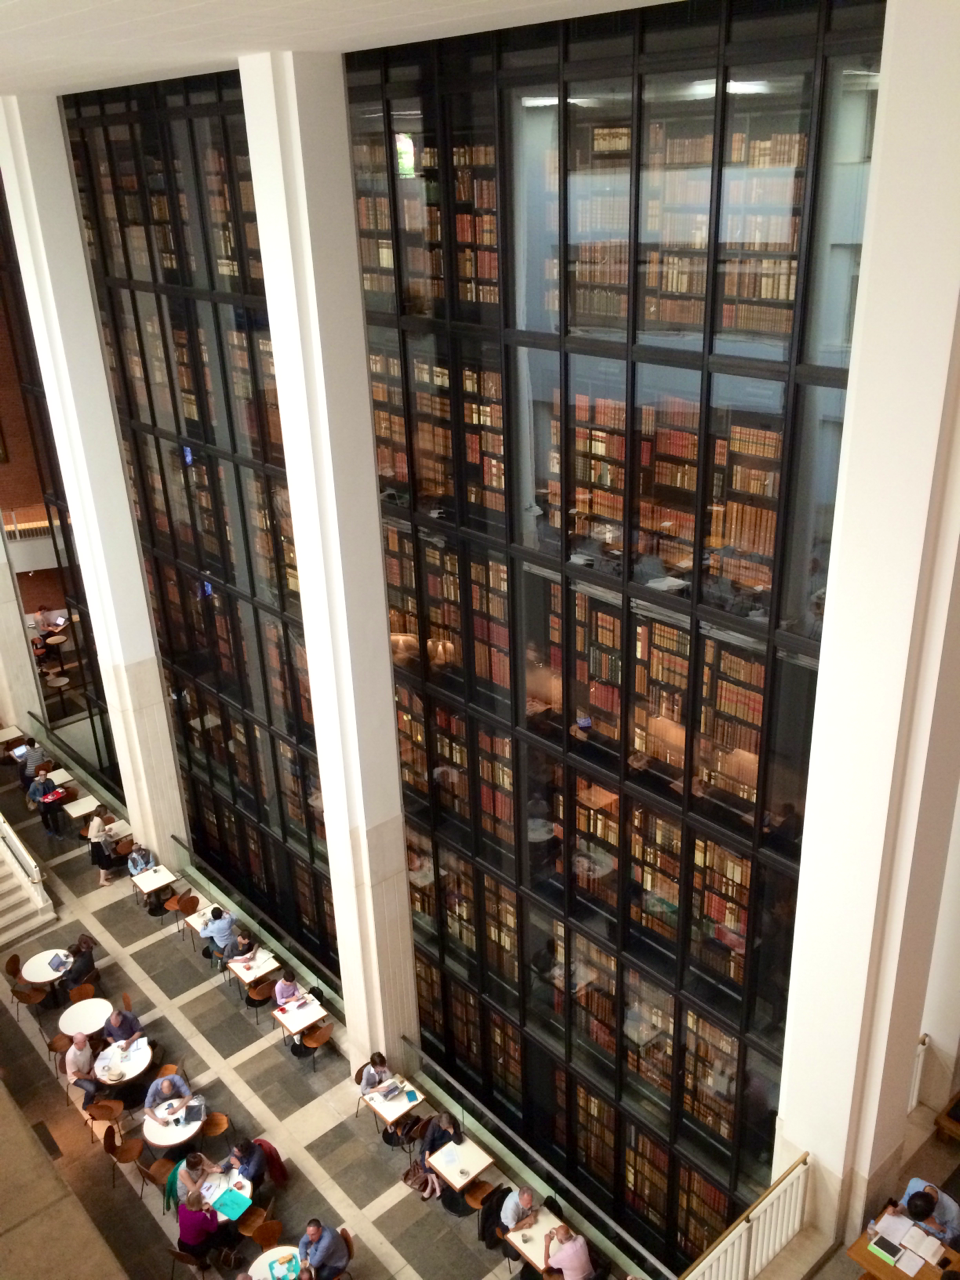 theletteraesc:
“ mrkinch:
“ zipping:
“ British Library
”
I walked completely around the King’s Library Tower, not easy through the cafe traffic, marveling at the display. It is good to be in the presence of books.
”
I miss it so muuuuuch
”